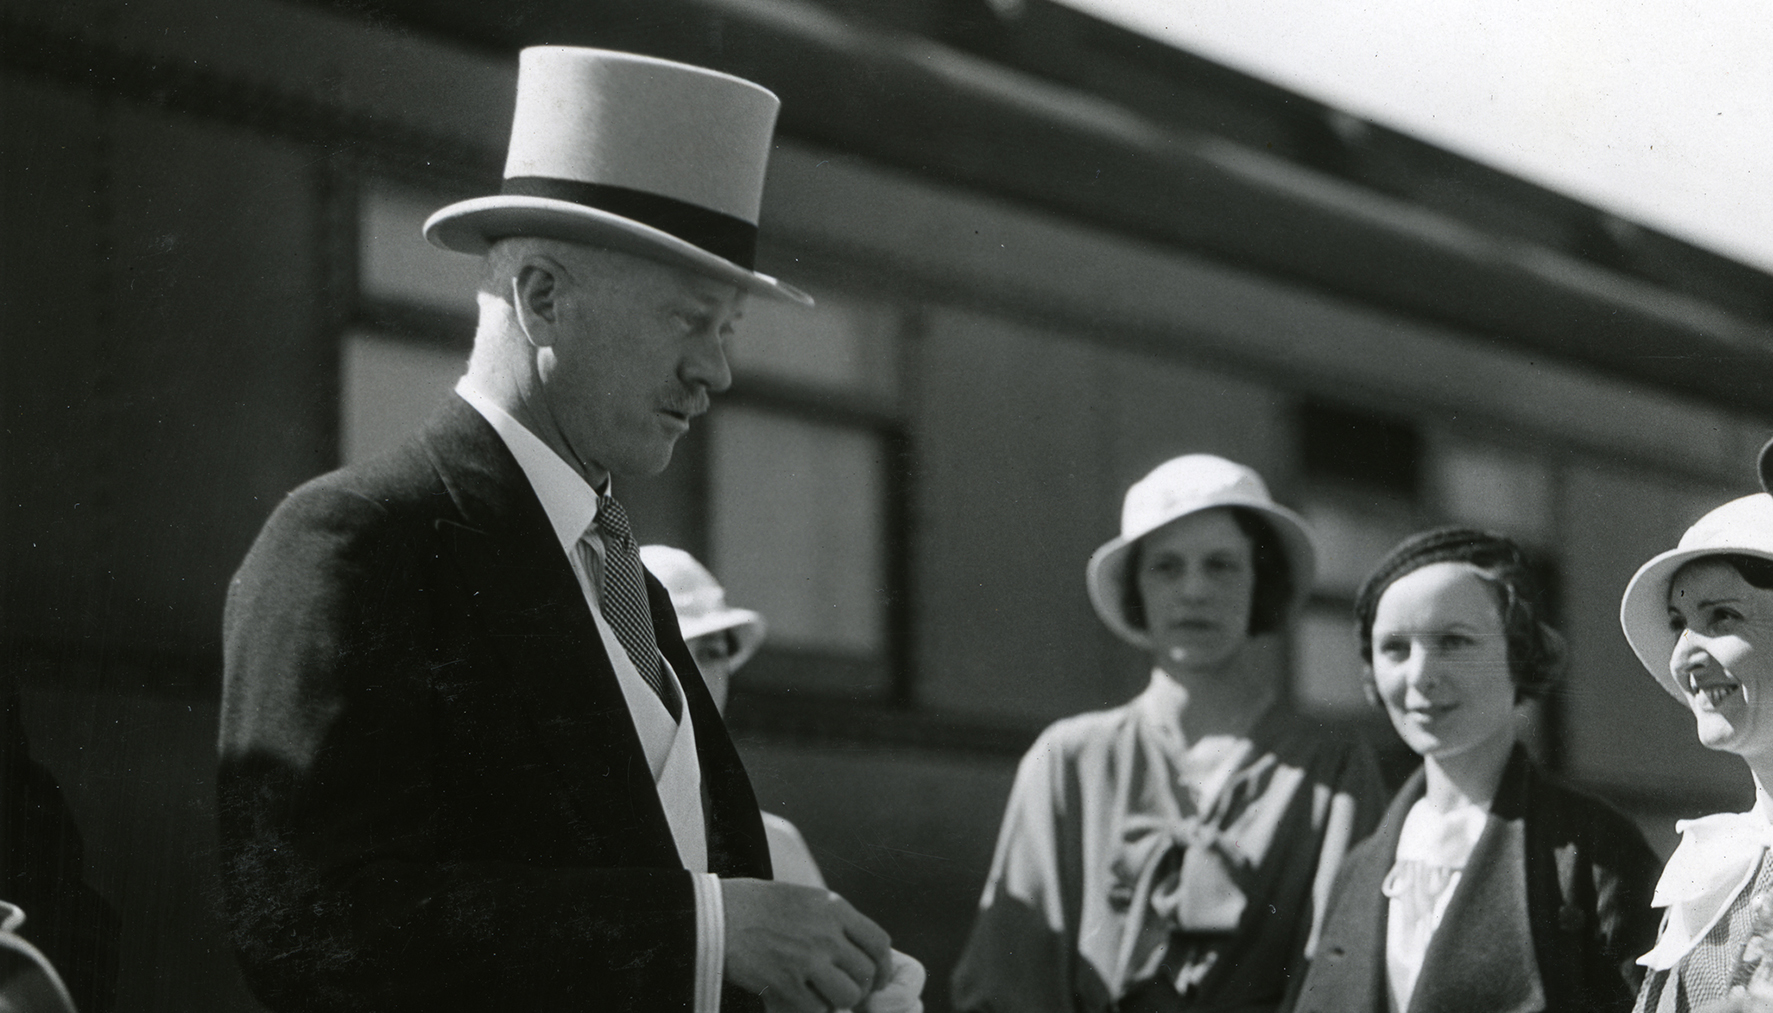 The Earl of Bessborough, Governor General of Canada, being greeted at the railway station in Edmonton, AB, 1933